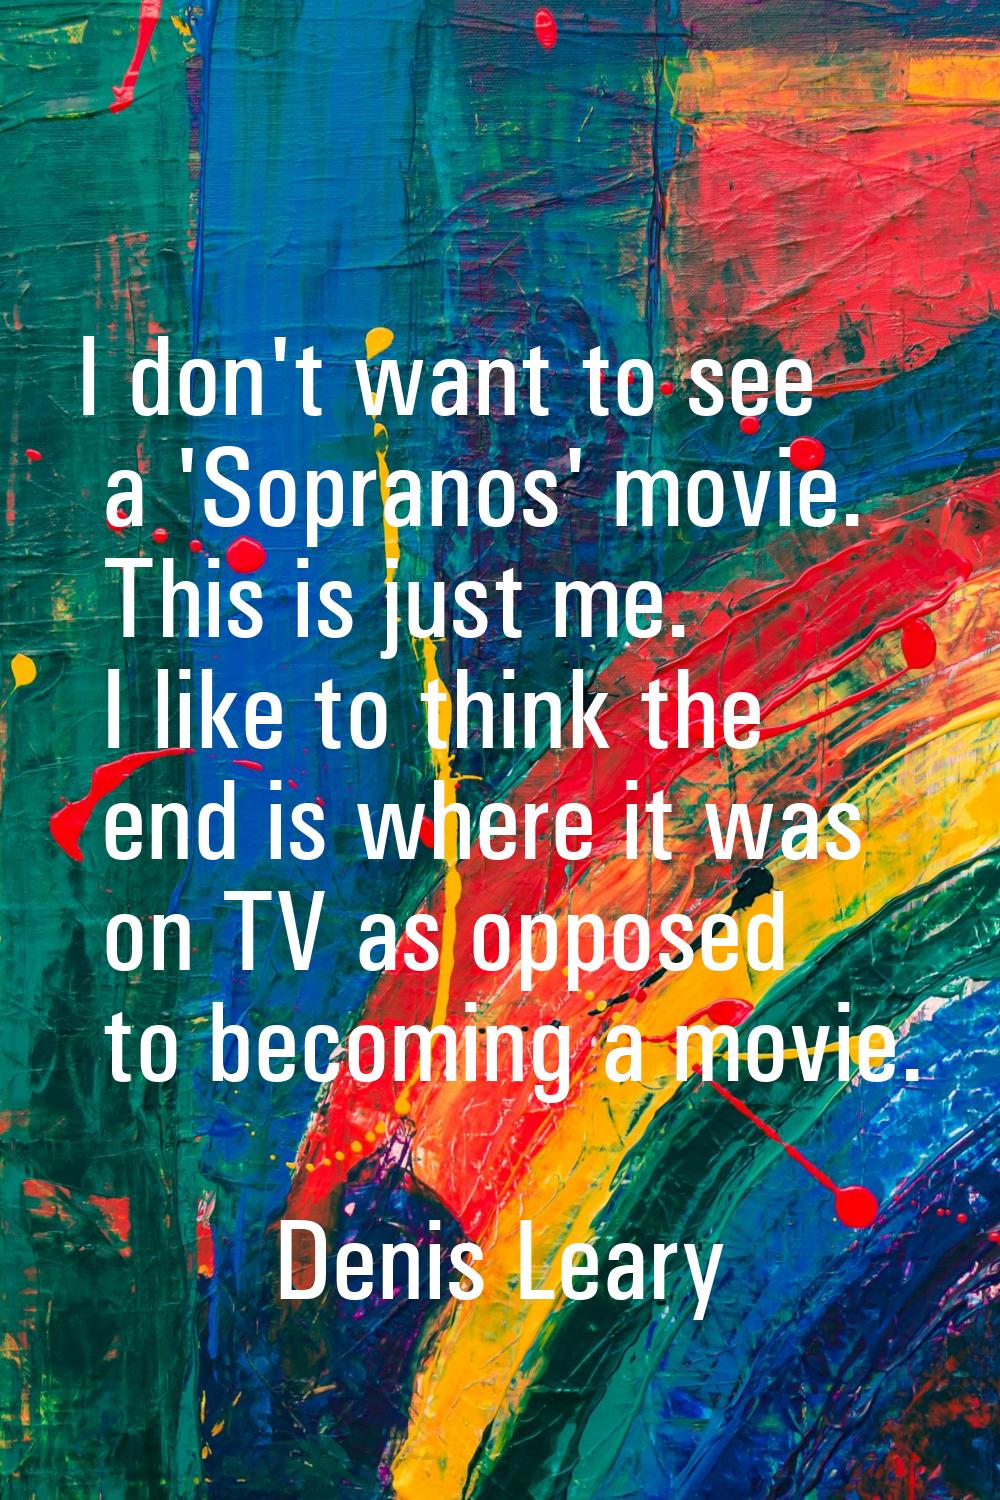 I don't want to see a 'Sopranos' movie. This is just me. I like to think the end is where it was on